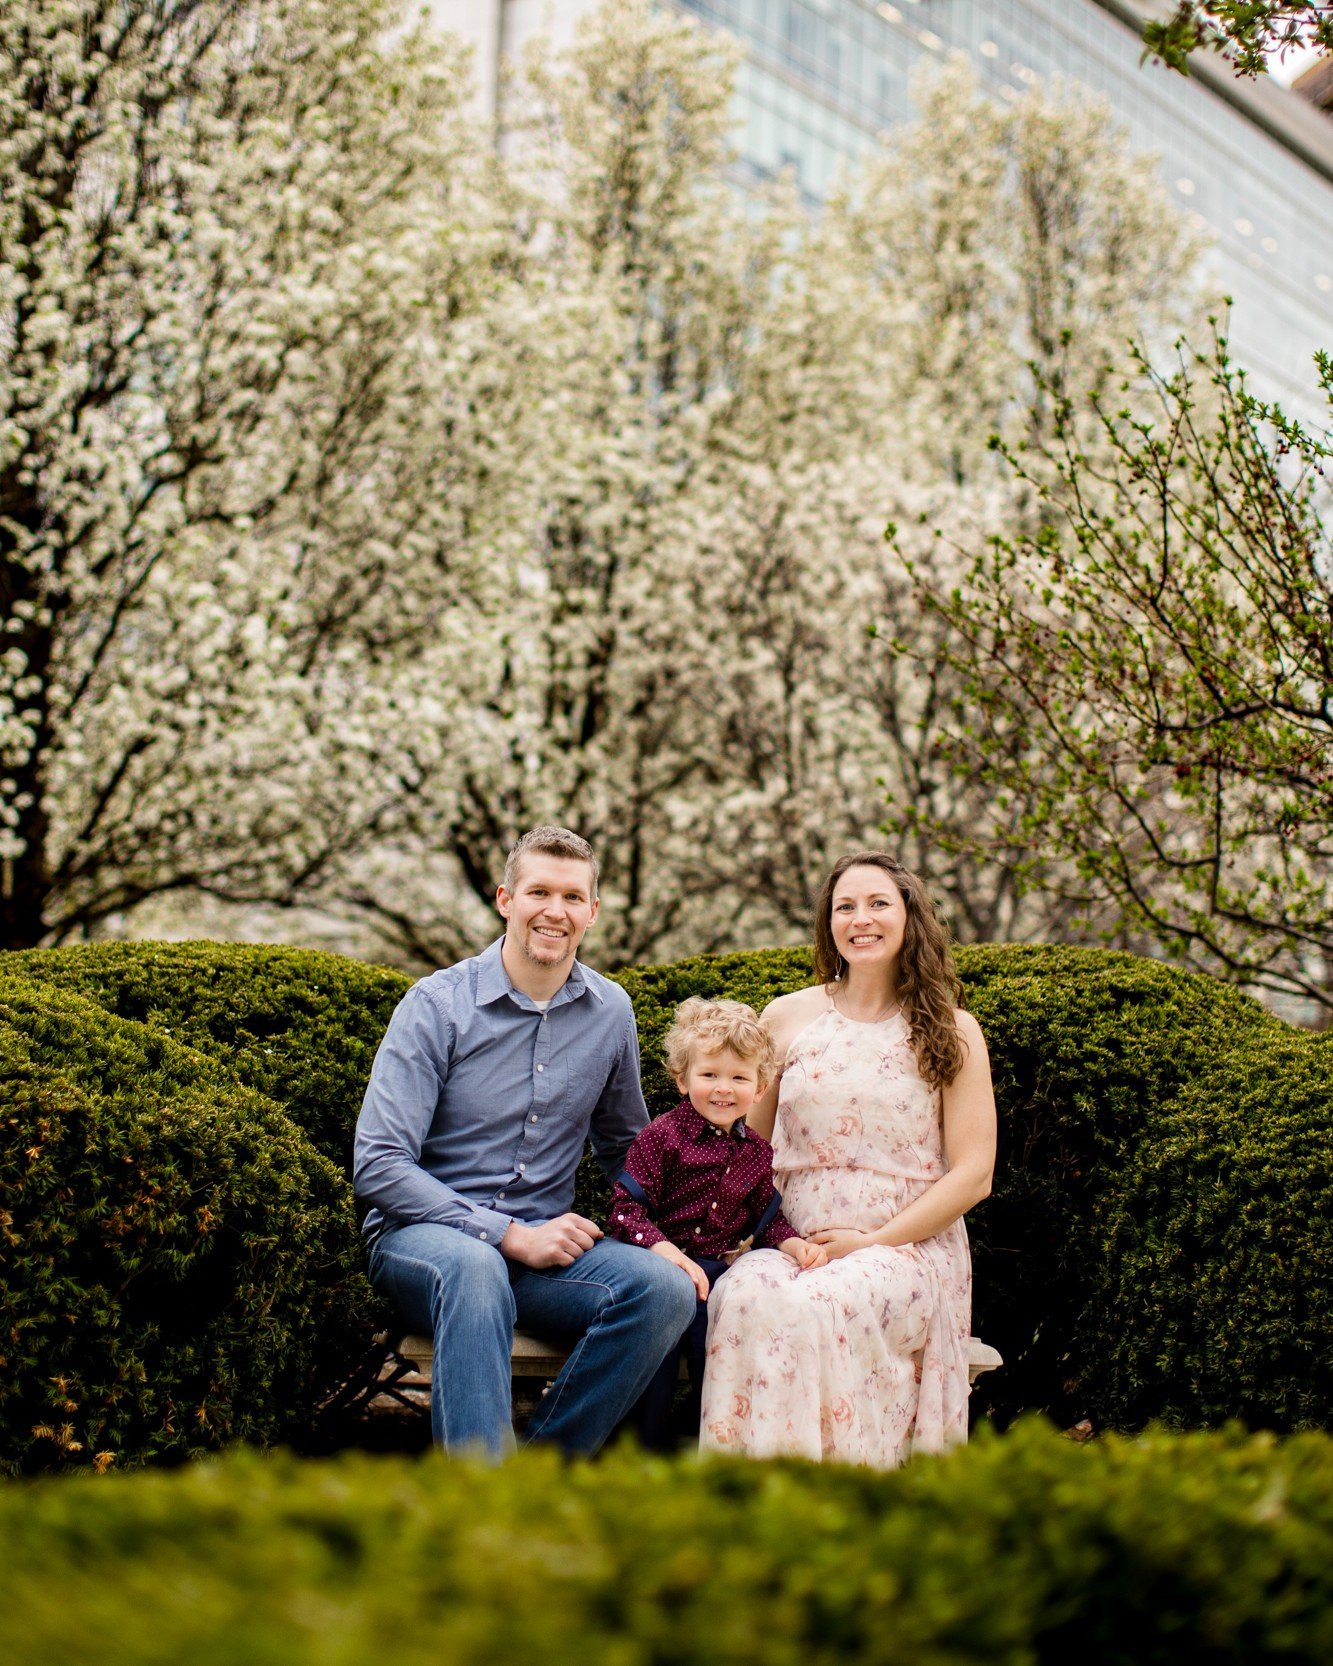 While going through my archives for a big project (yes, that's a hint at something coming soon!), I came across one of my favorite maternity sessions of all time shot at the World Food Prize.

If you're still wanting Spring photos with the blooms, I 